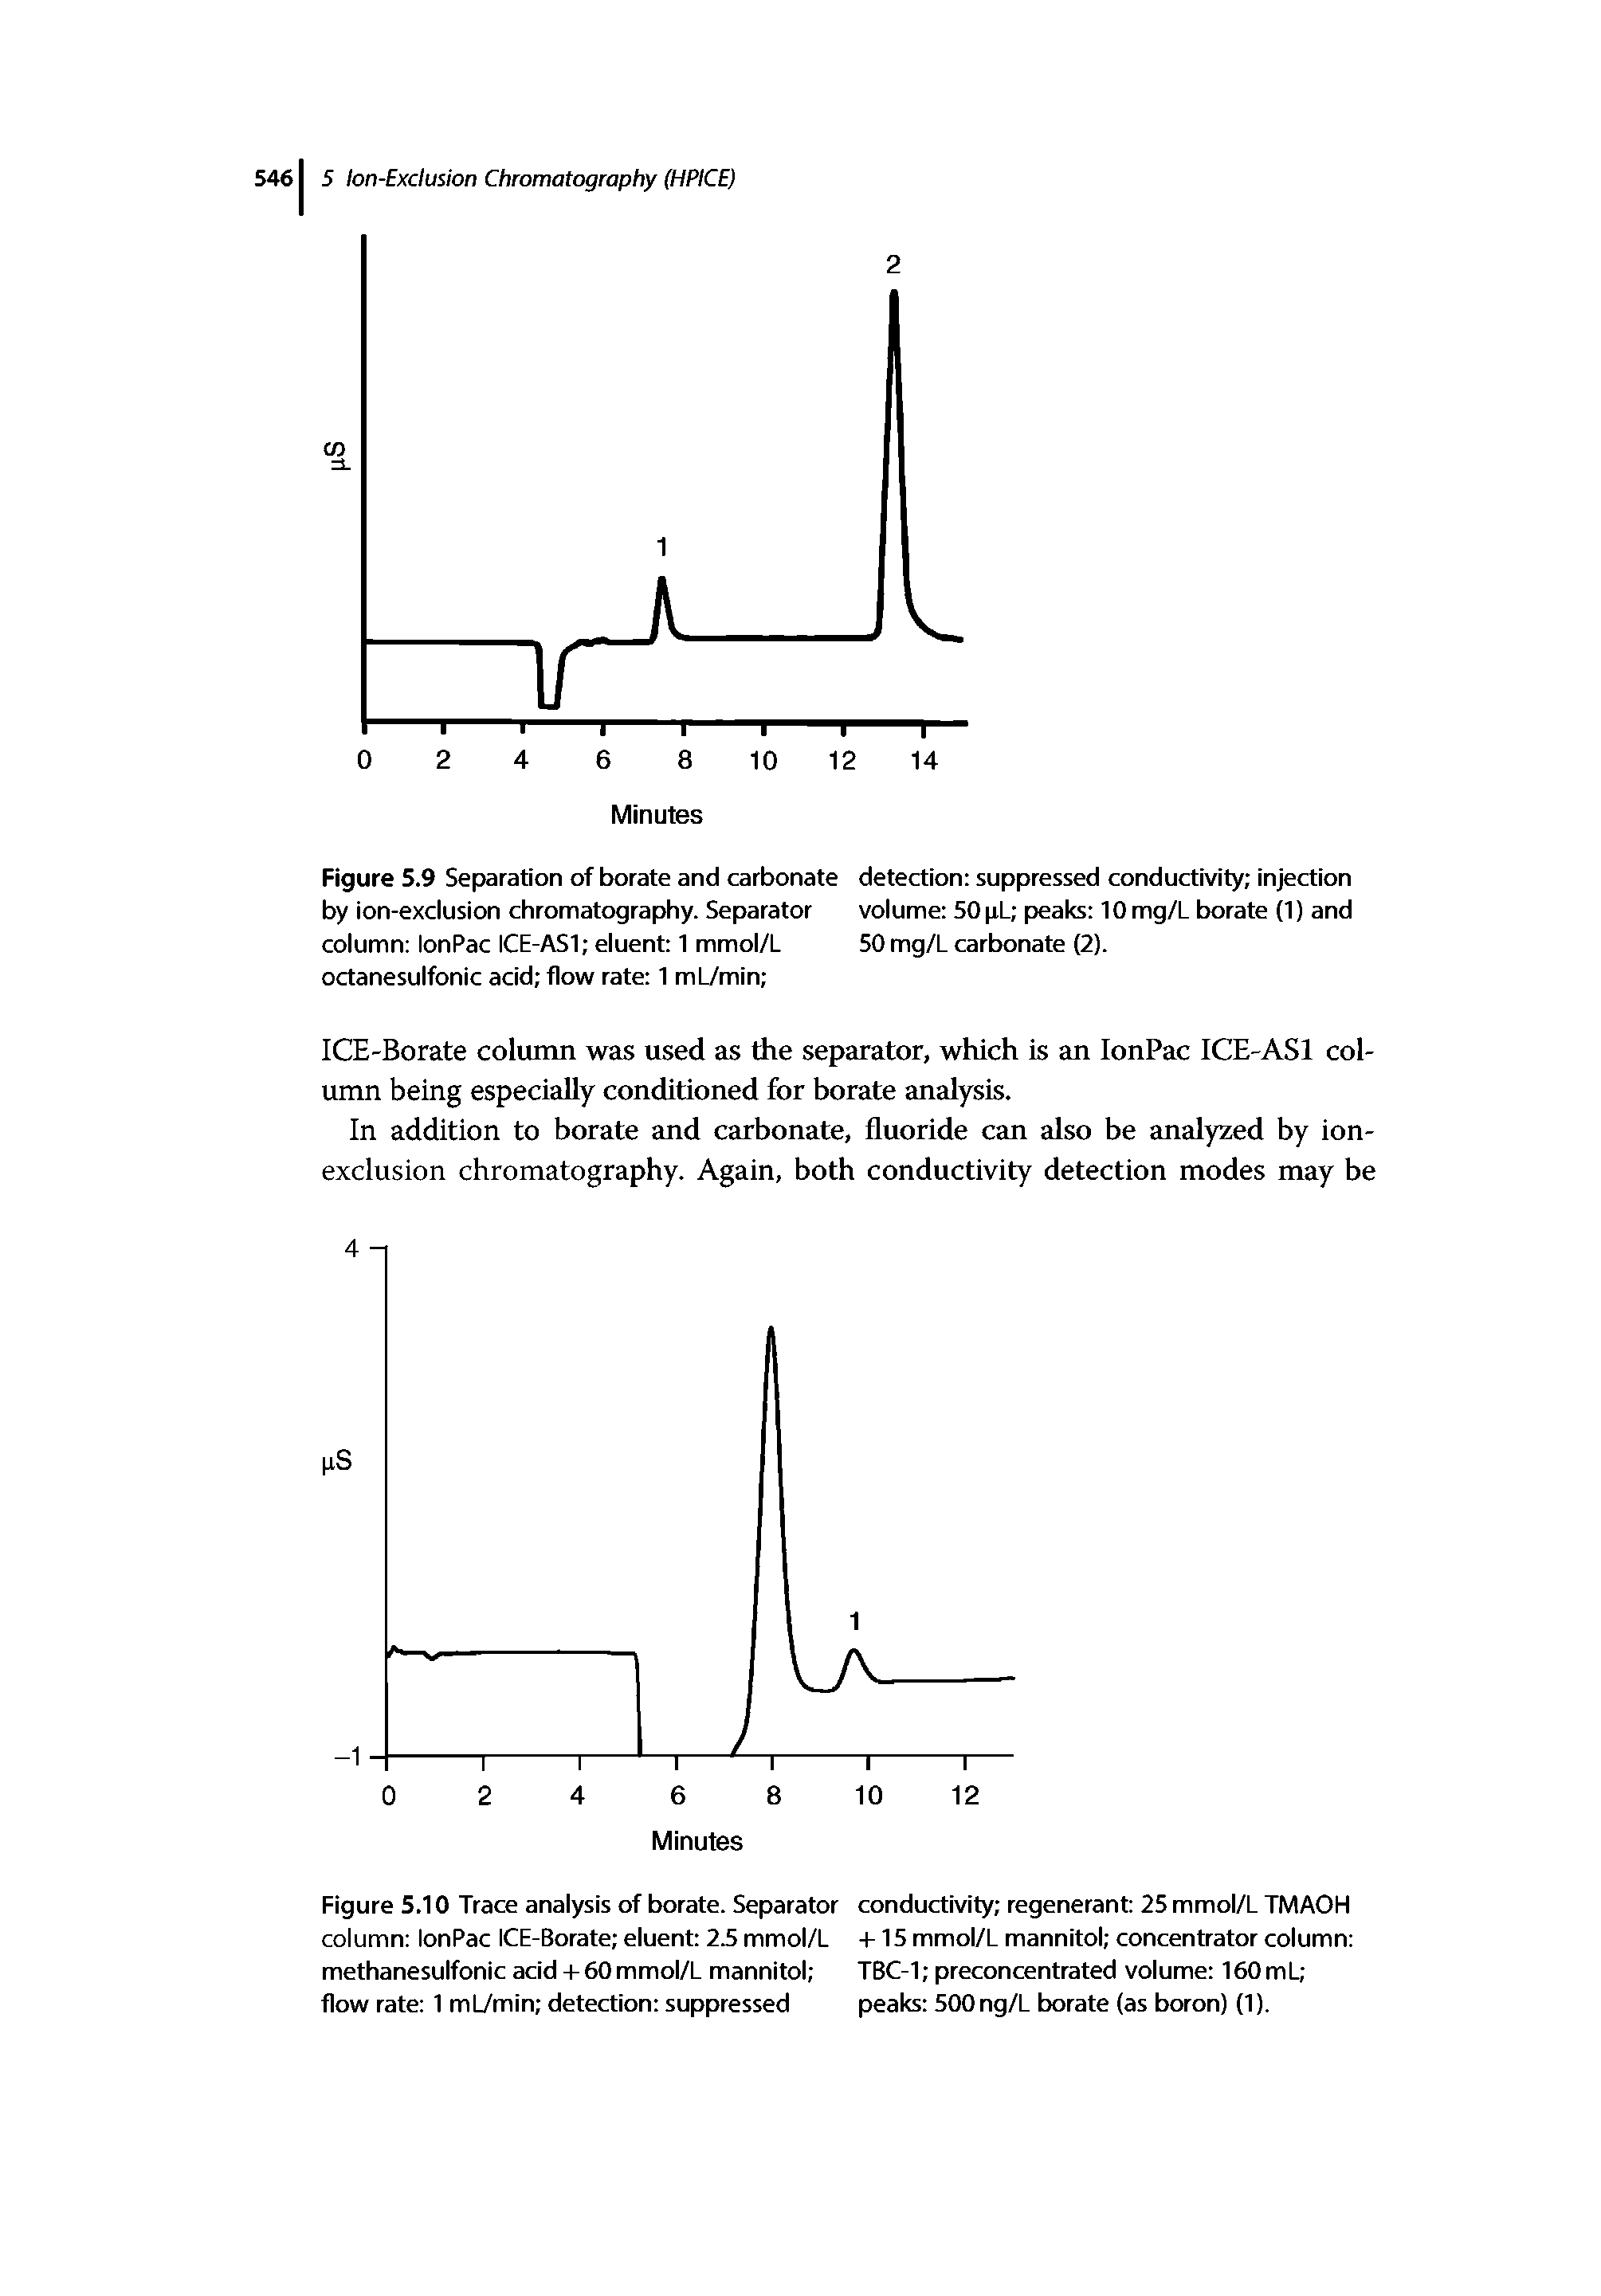 Figure 5.9 Separation of borate and carbonate detection suppressed conductivity injection by ion-exclusion chromatography. Separator volume 50 pL peaks 10 mg/L borate (1) and column lonPac ICE-AS1 eluent 1 mmol/L 50 mg/L carbonate (2). octanesulfonic acid flow rate 1 mlVmin ...